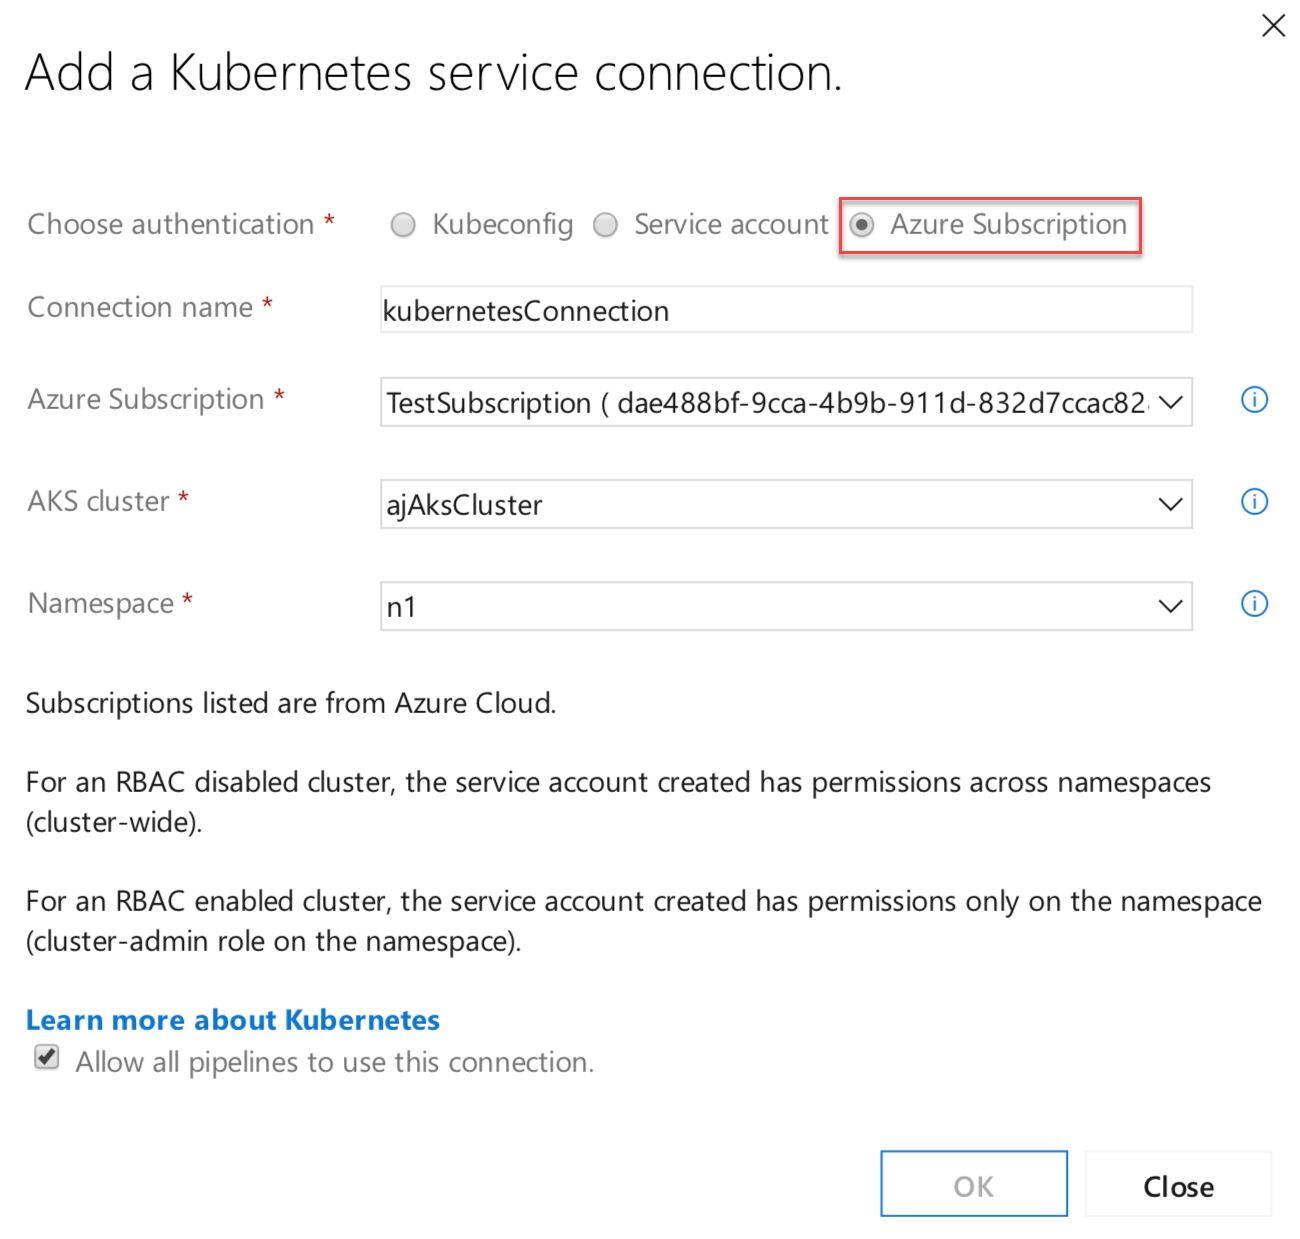 Screenshot of the Add a Kubernetes service connection dialog box with the Azure Subscription option called out.